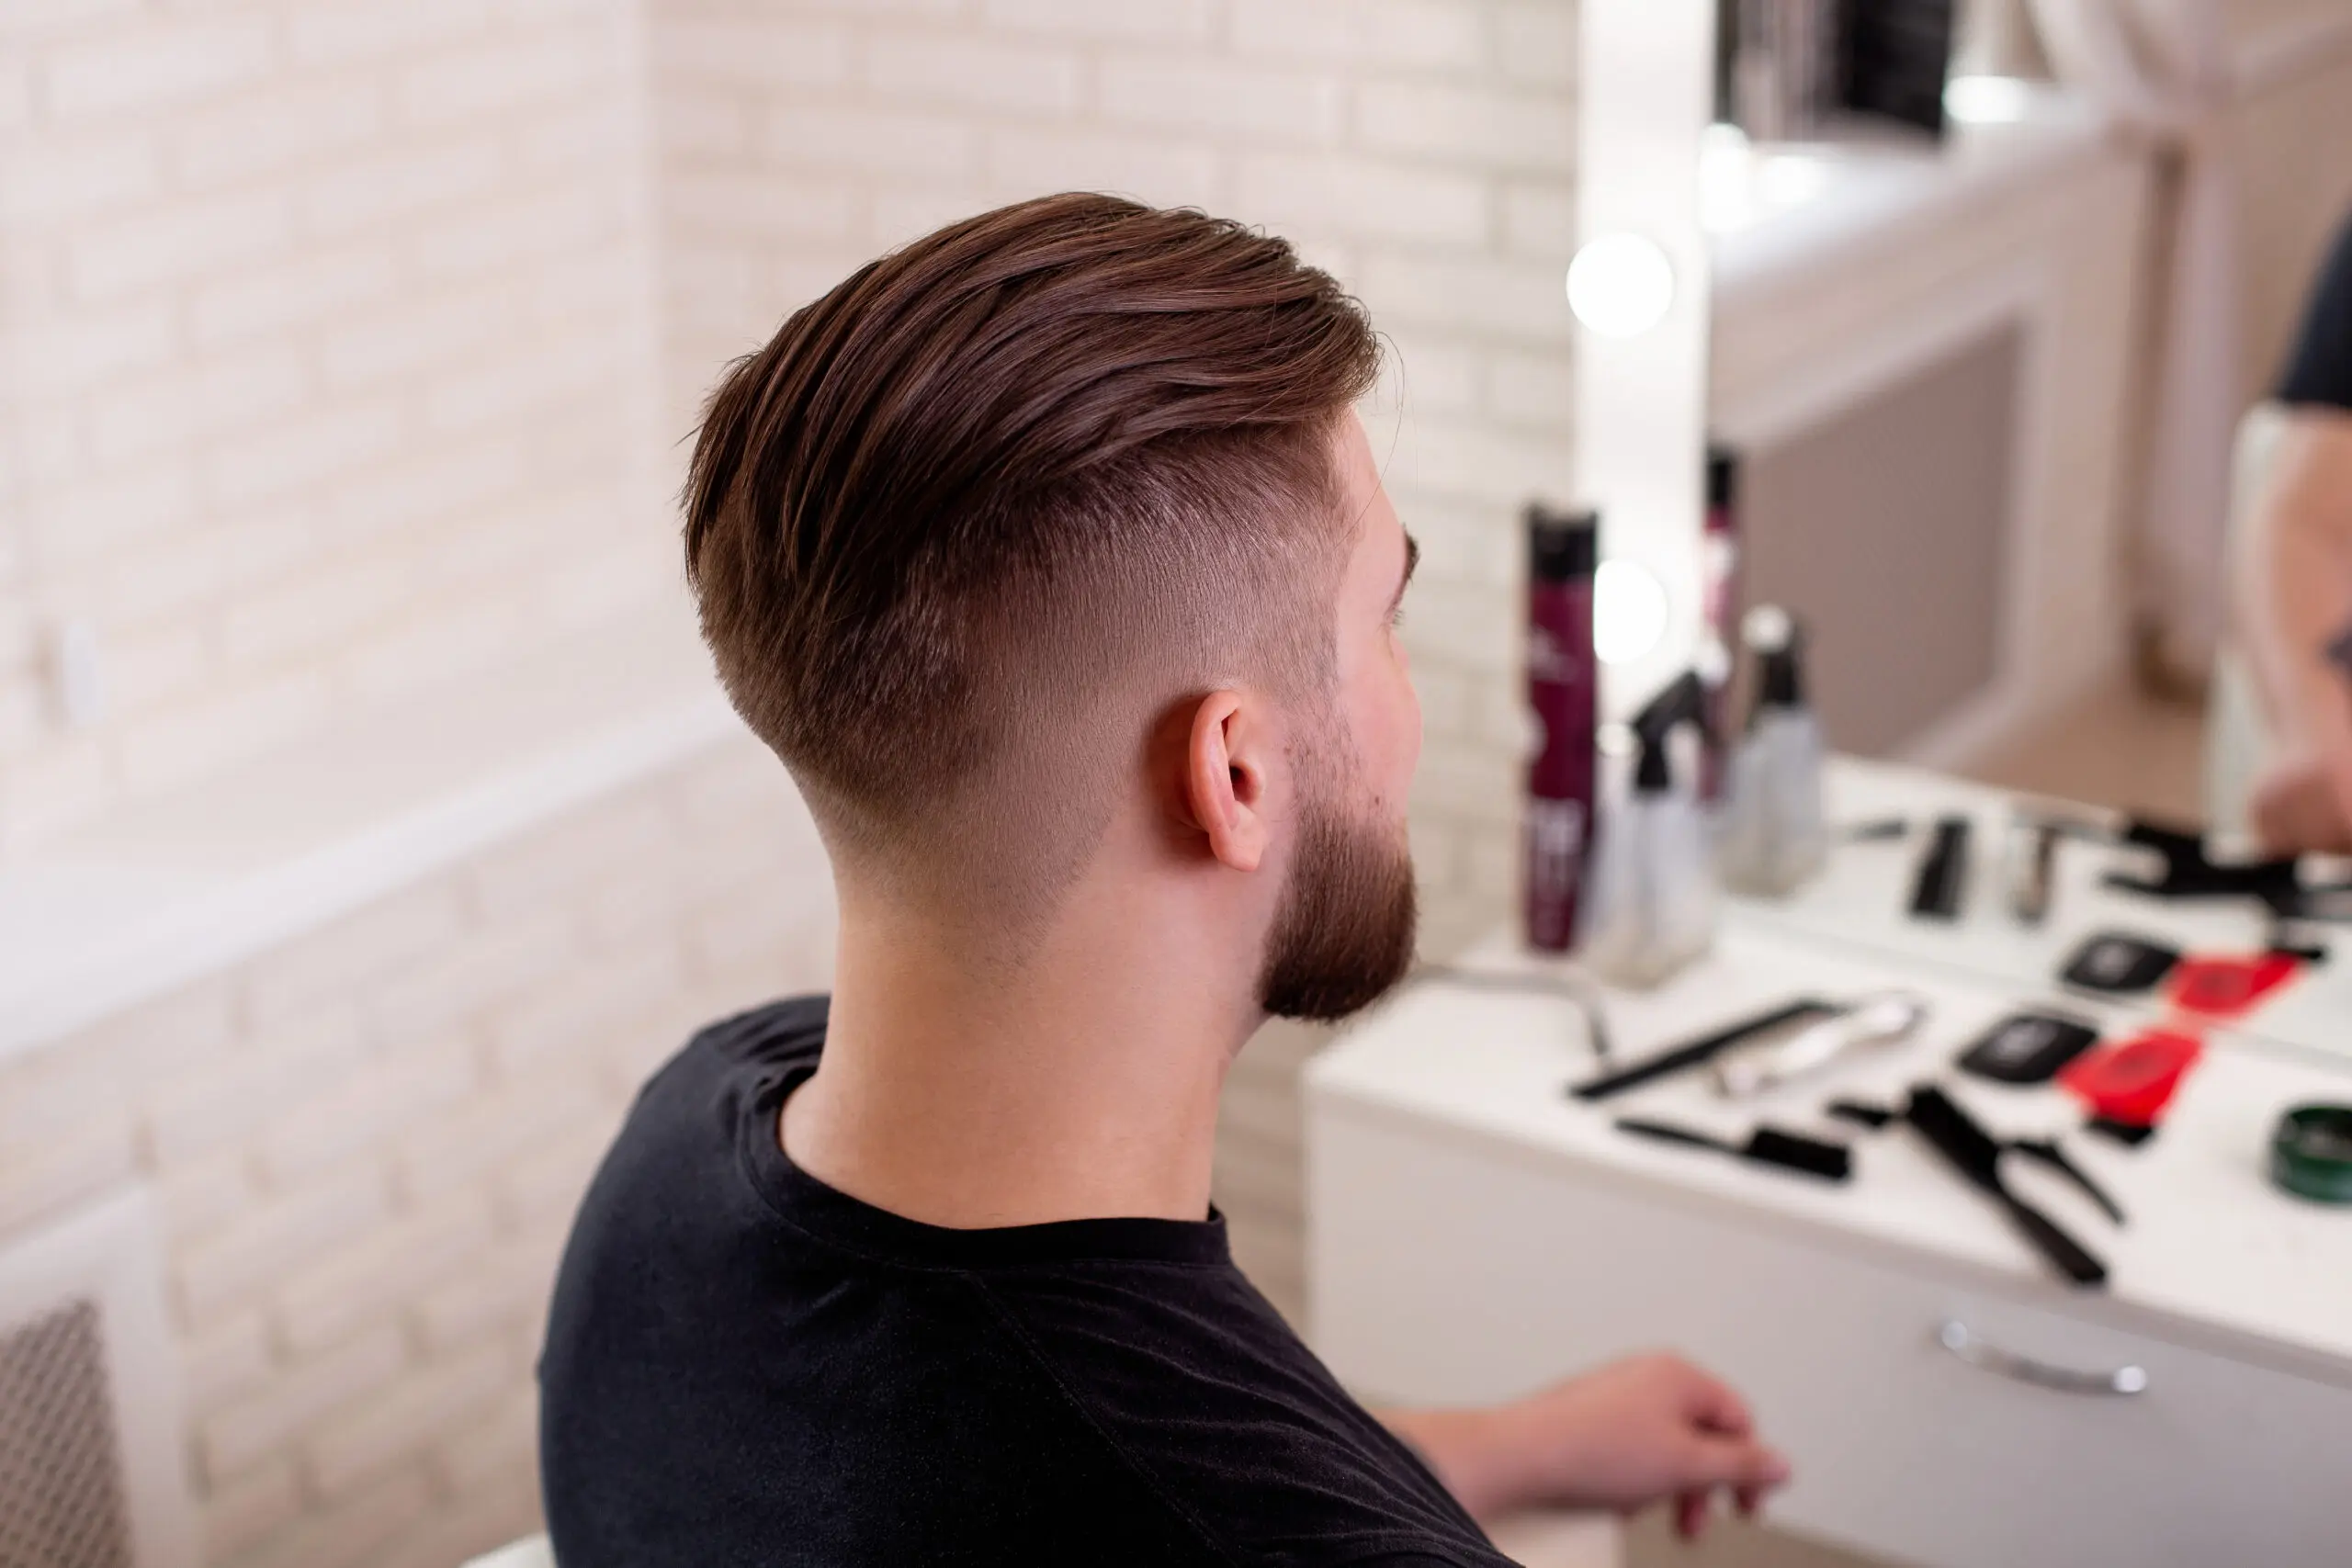 15 Undercut Hairstyles For Men - The Hair Trend